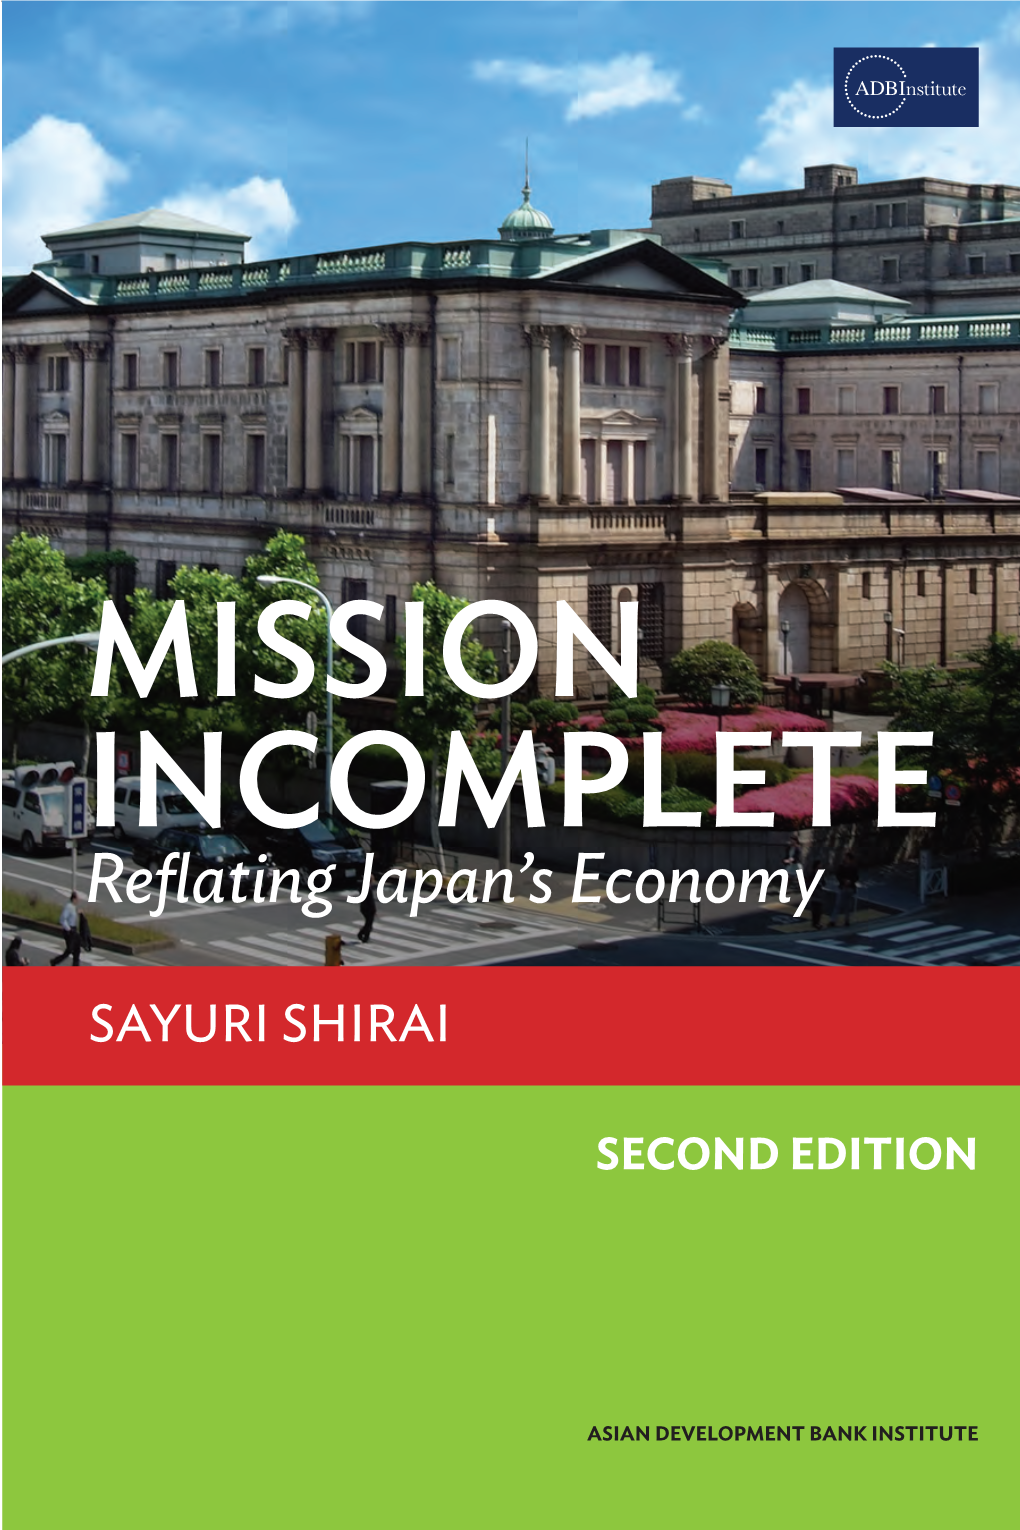 Mission Incomplete: Reflating Japan's Economy